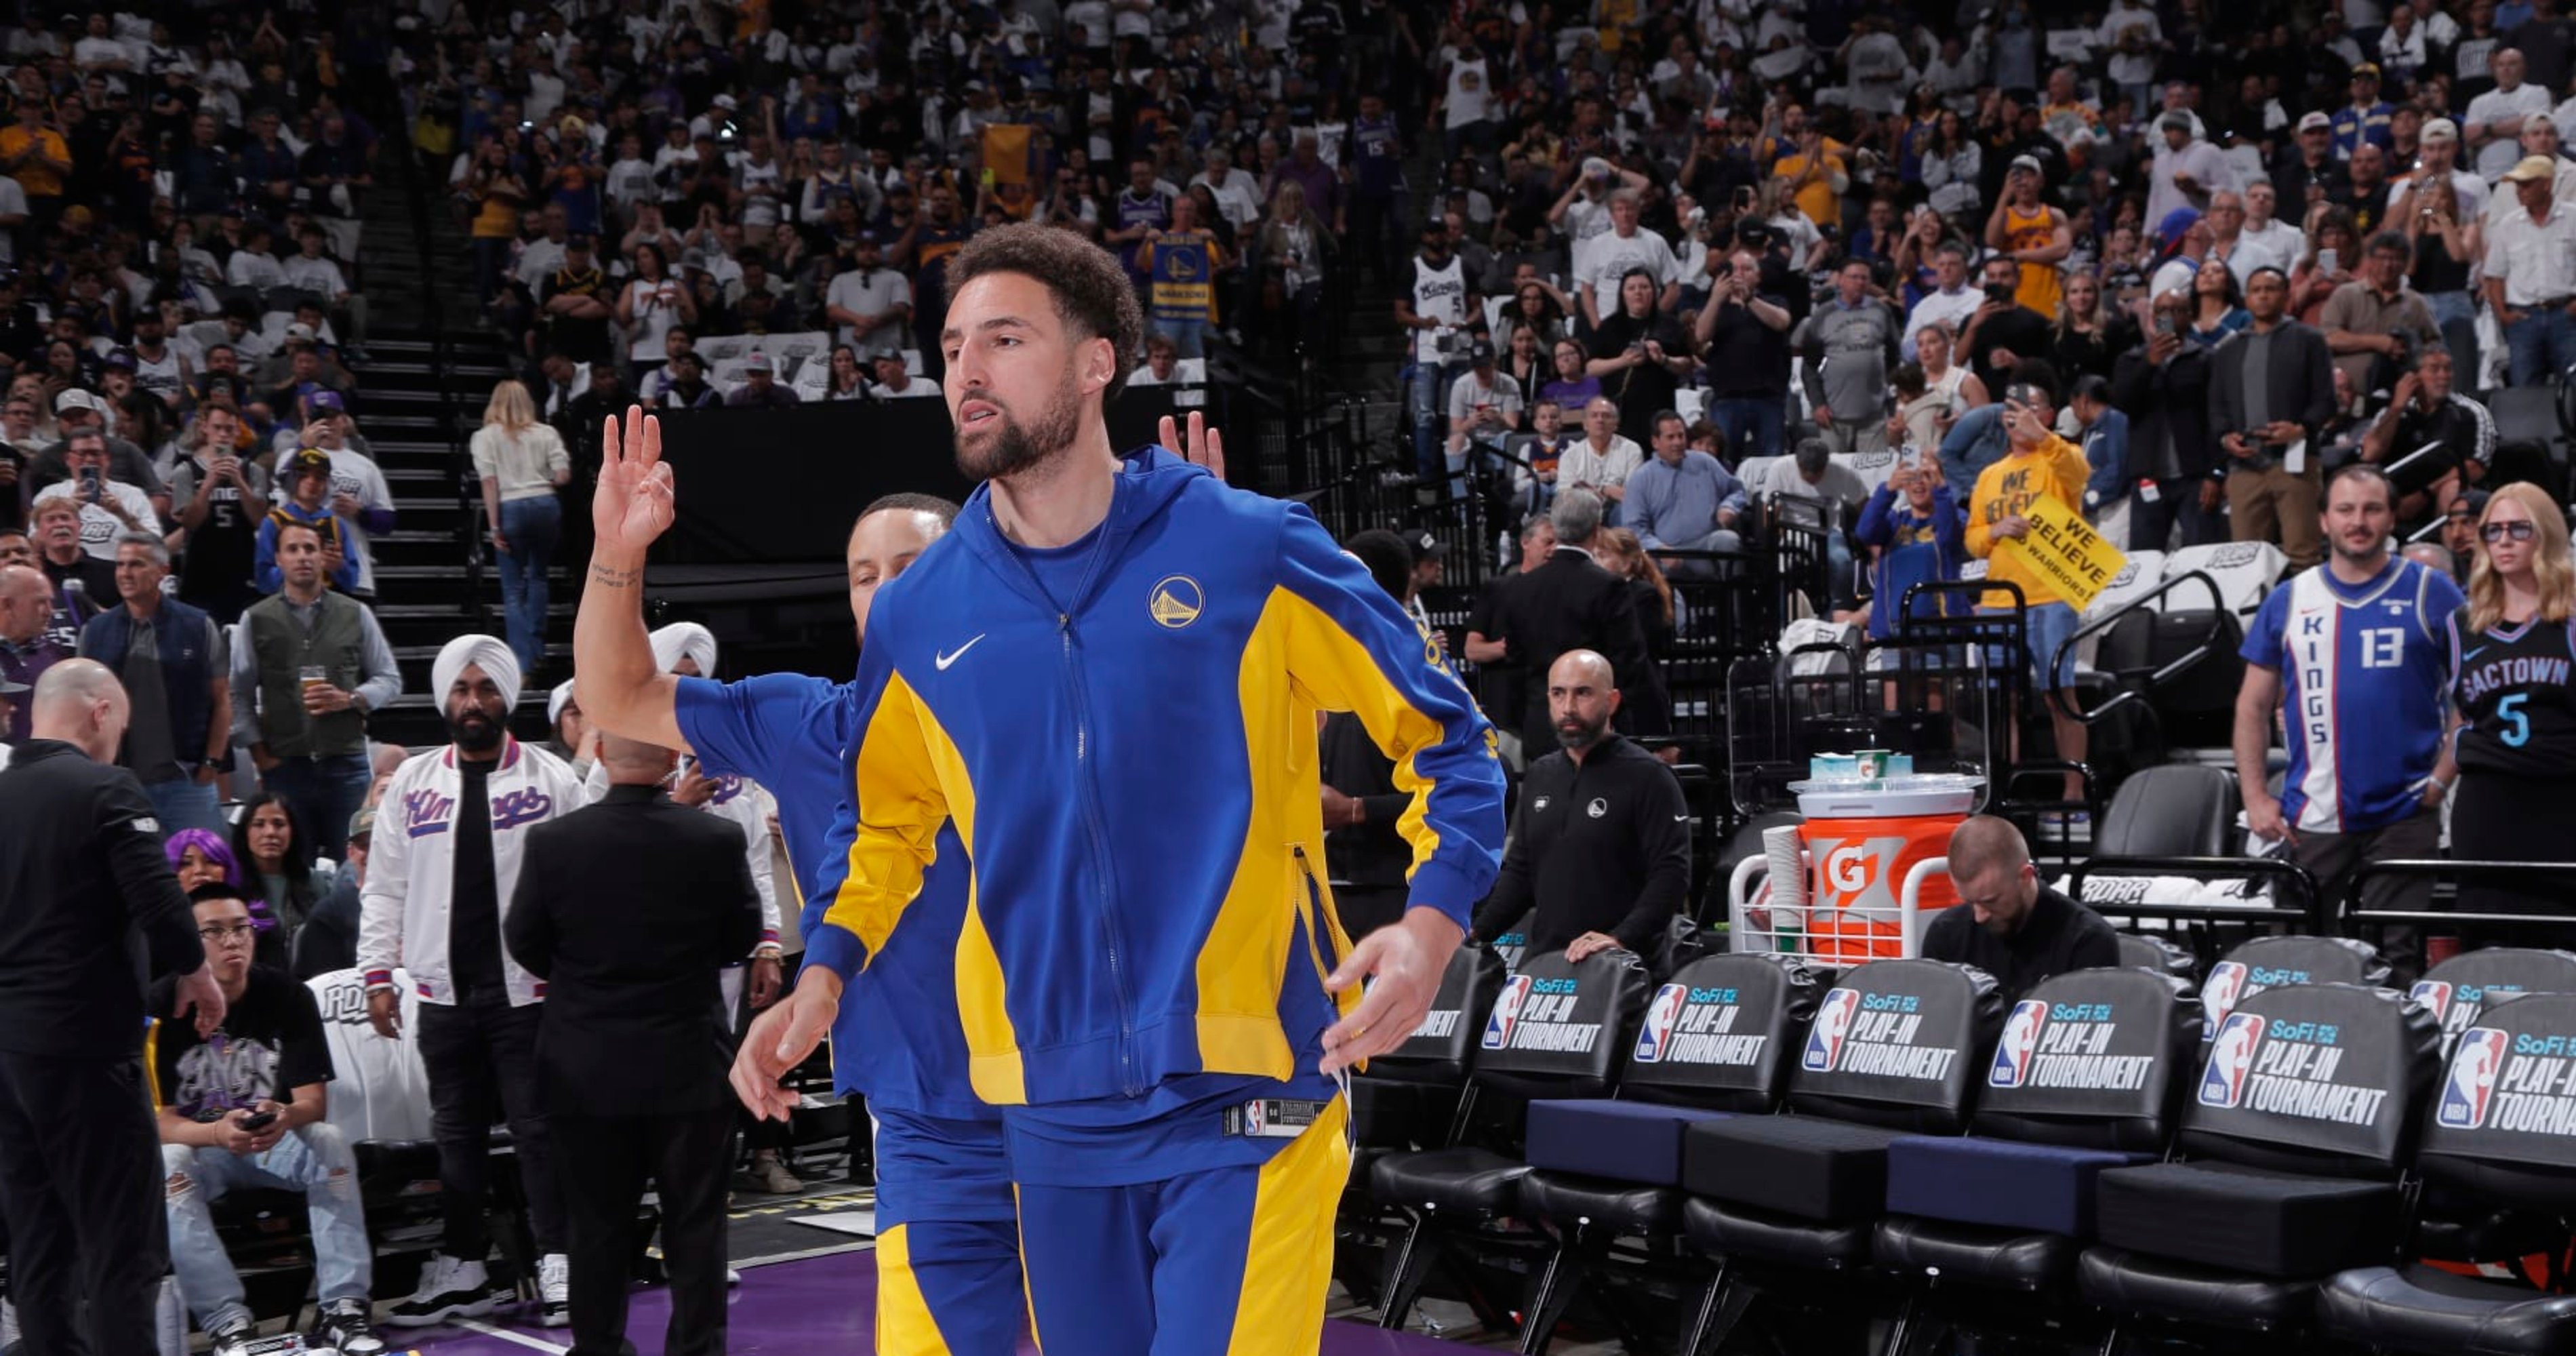 Klay Thompson to Wear No. 31 Jersey with Mavs After Sign-and-Trade from Warriors